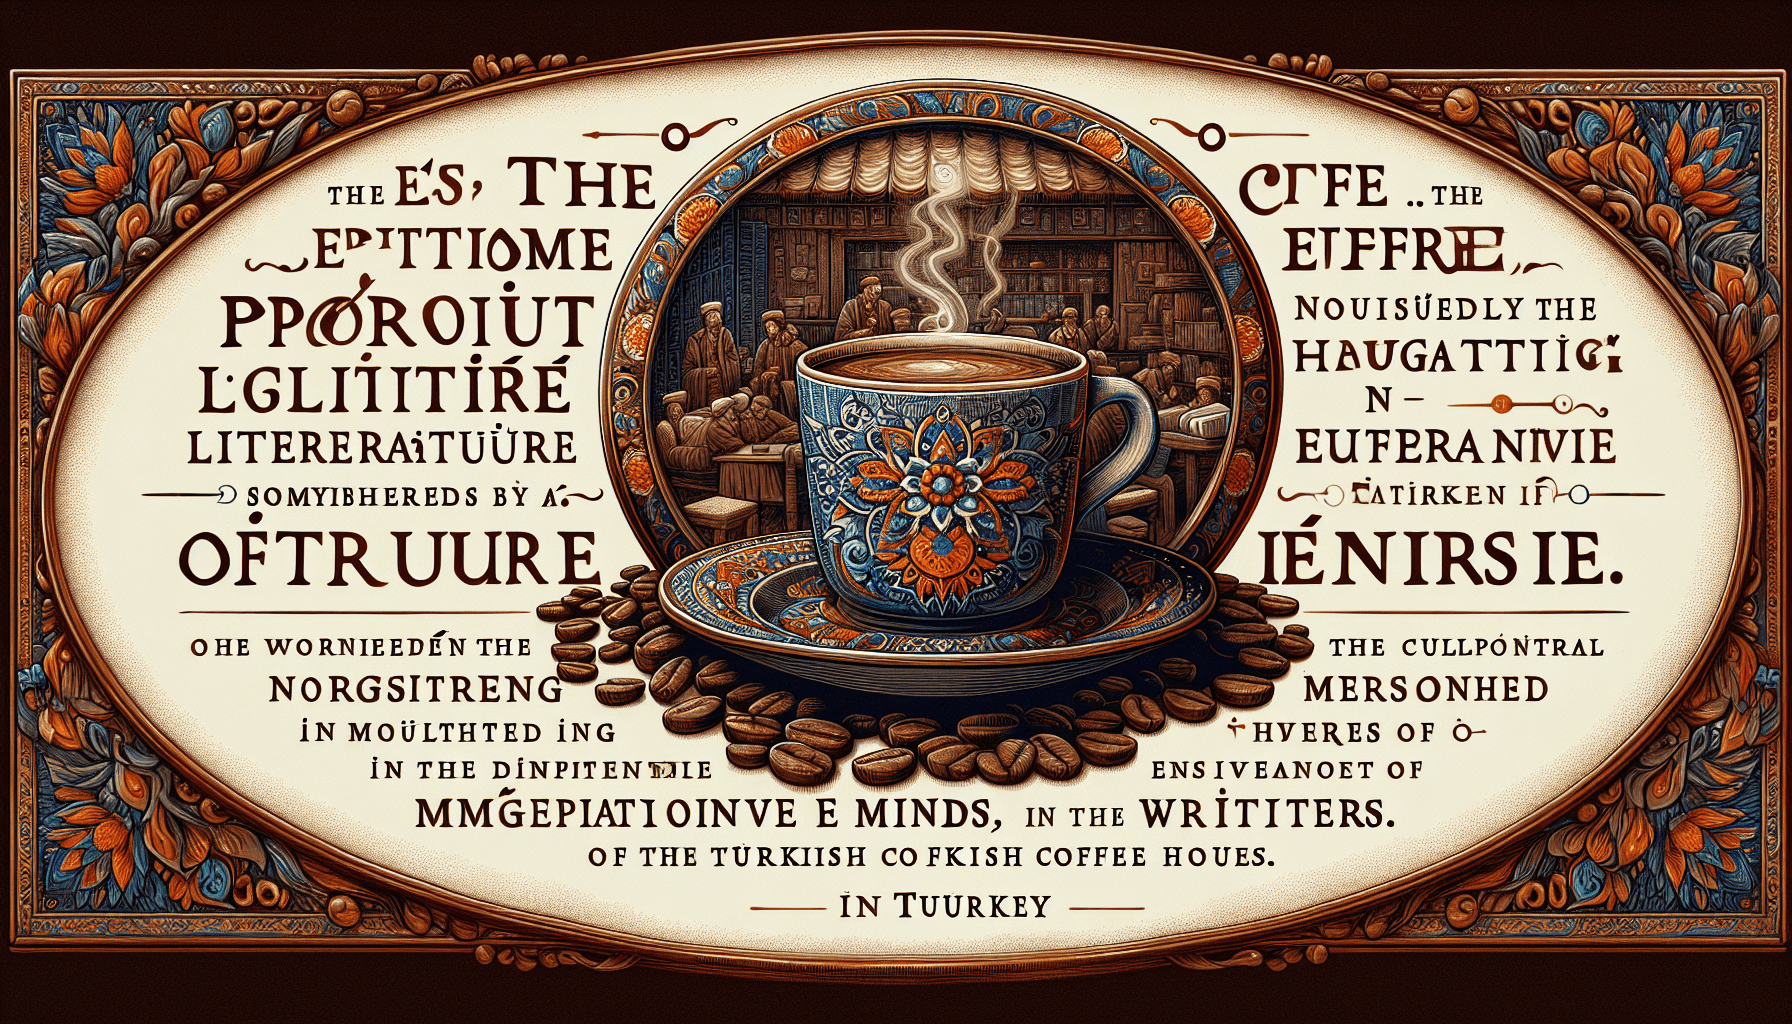 An ornate, detailed illustration depicting a coffee cup with an intricately patterned design, surrounded by coffee beans and a text-filled background referencing Turkey's rich coffeehouse culture and literature.